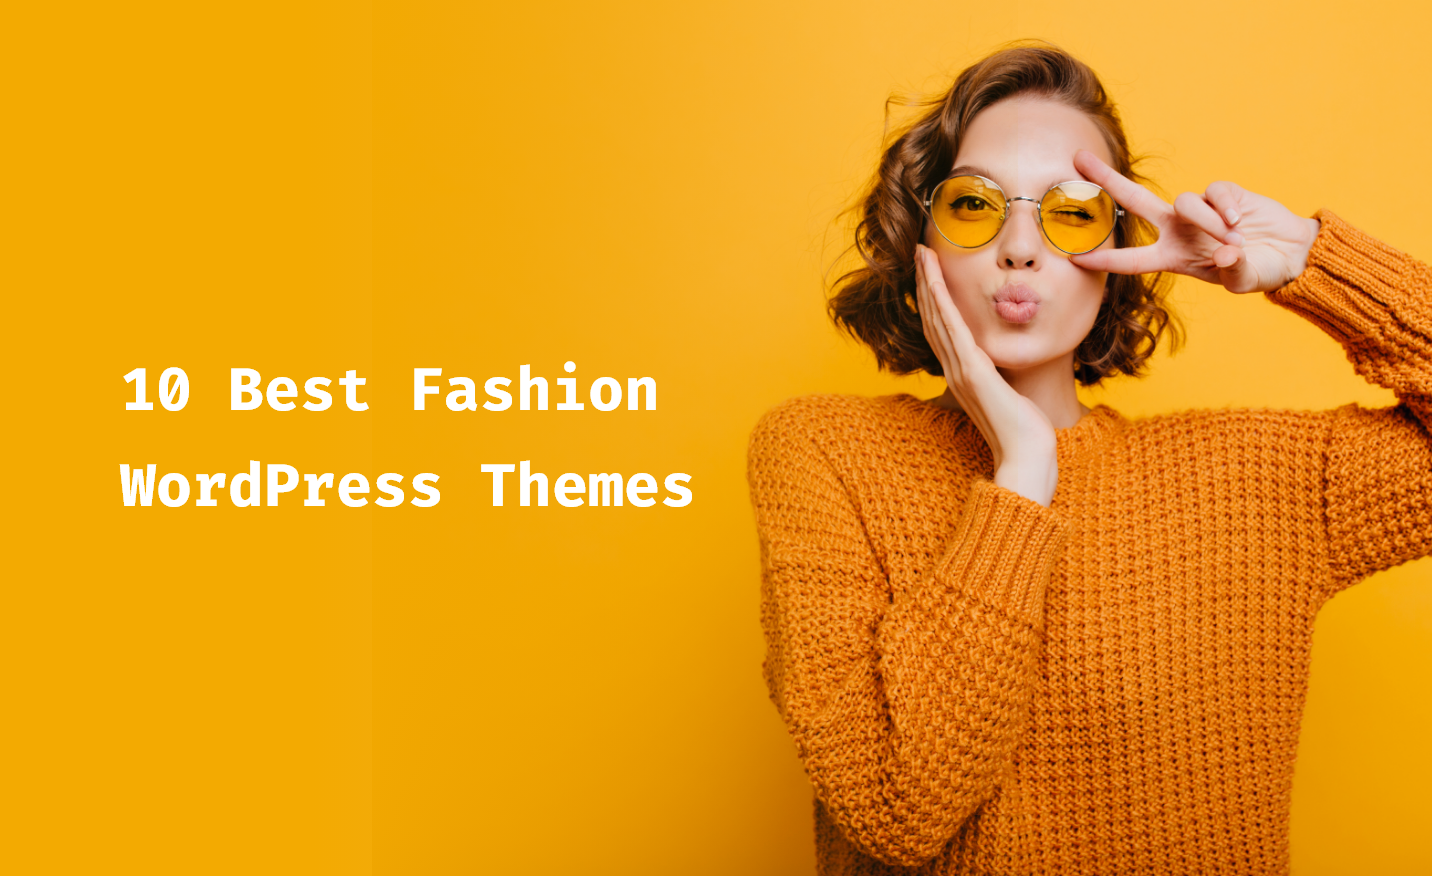 Cover Image for 10 Best Fashion WordPress Themes in 2021